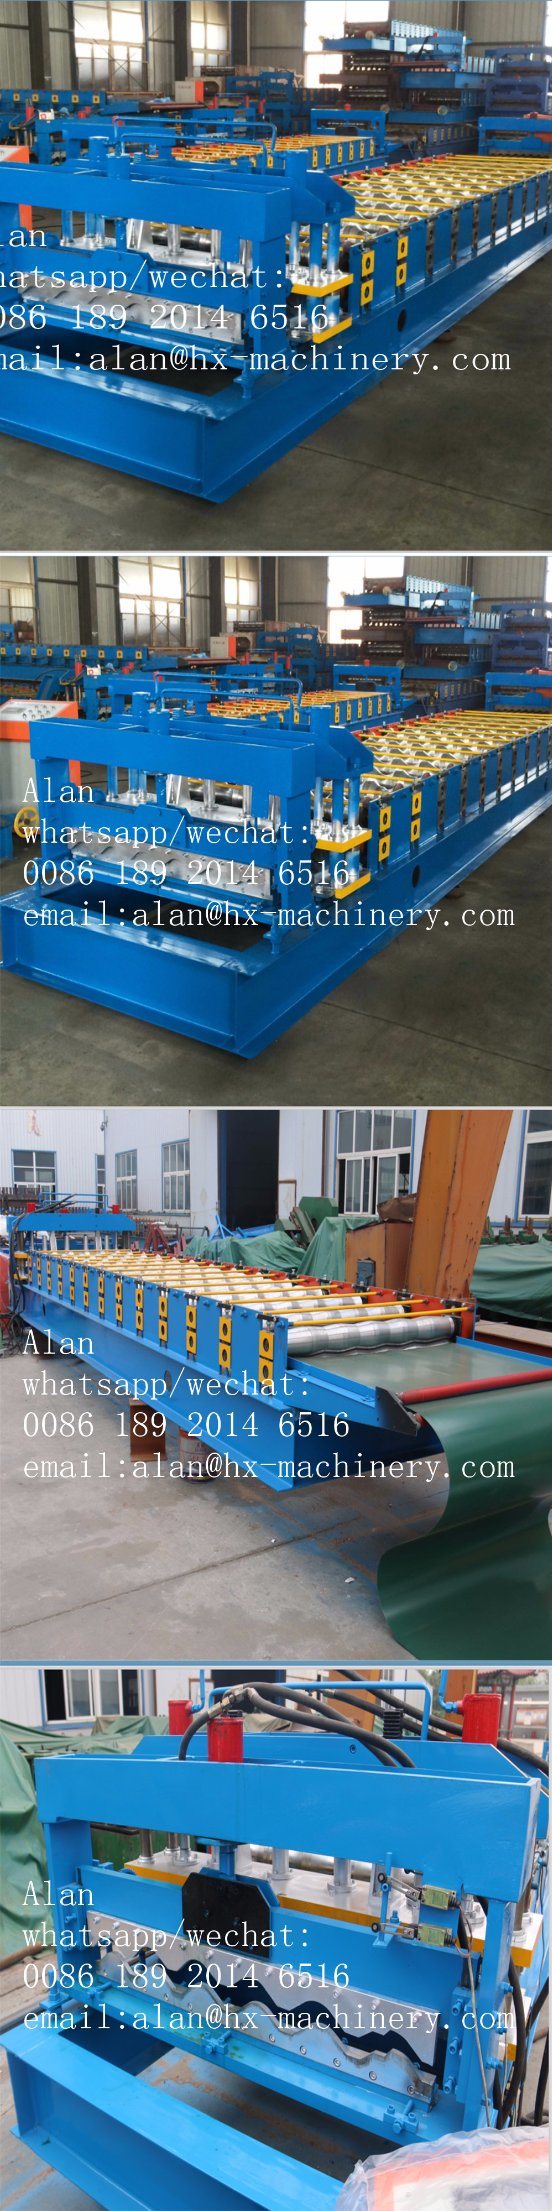 Automatic Metal Roof Glazed Tile Roll Forming Machine Manufacturers